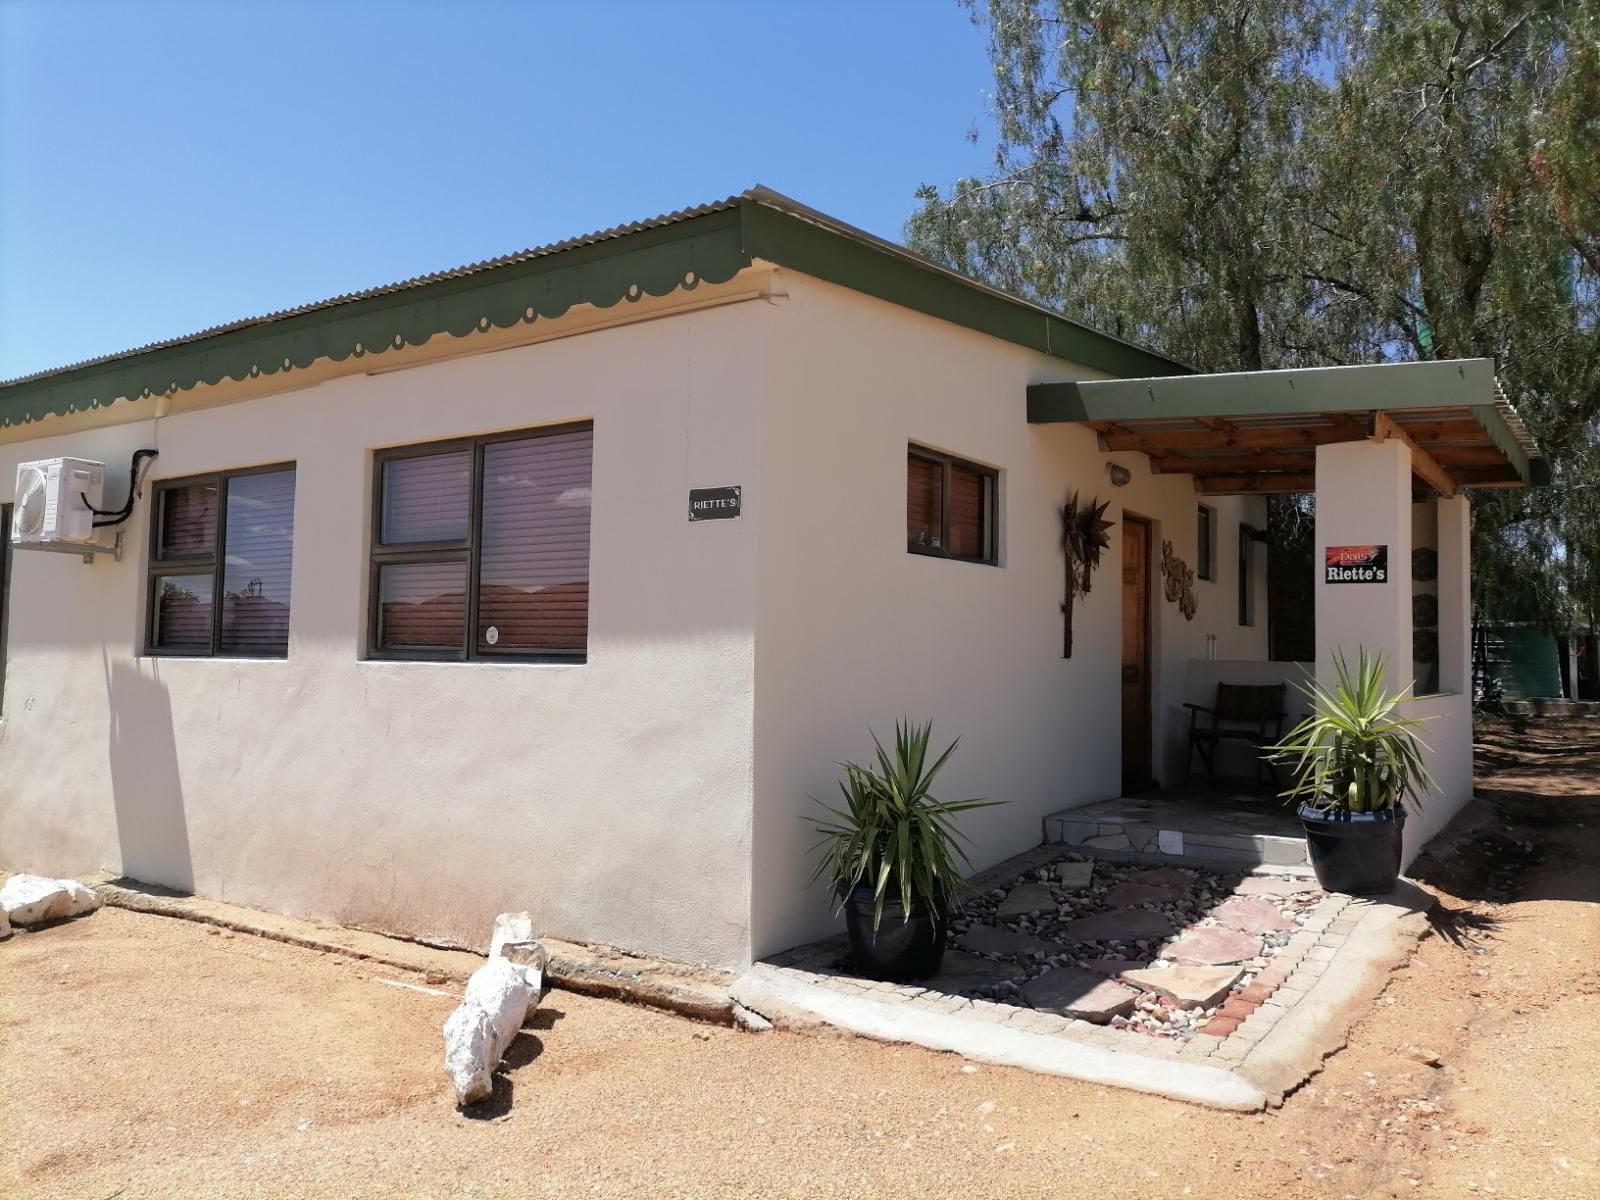 Daisy Country Lodge Springbok Northern Cape South Africa House, Building, Architecture